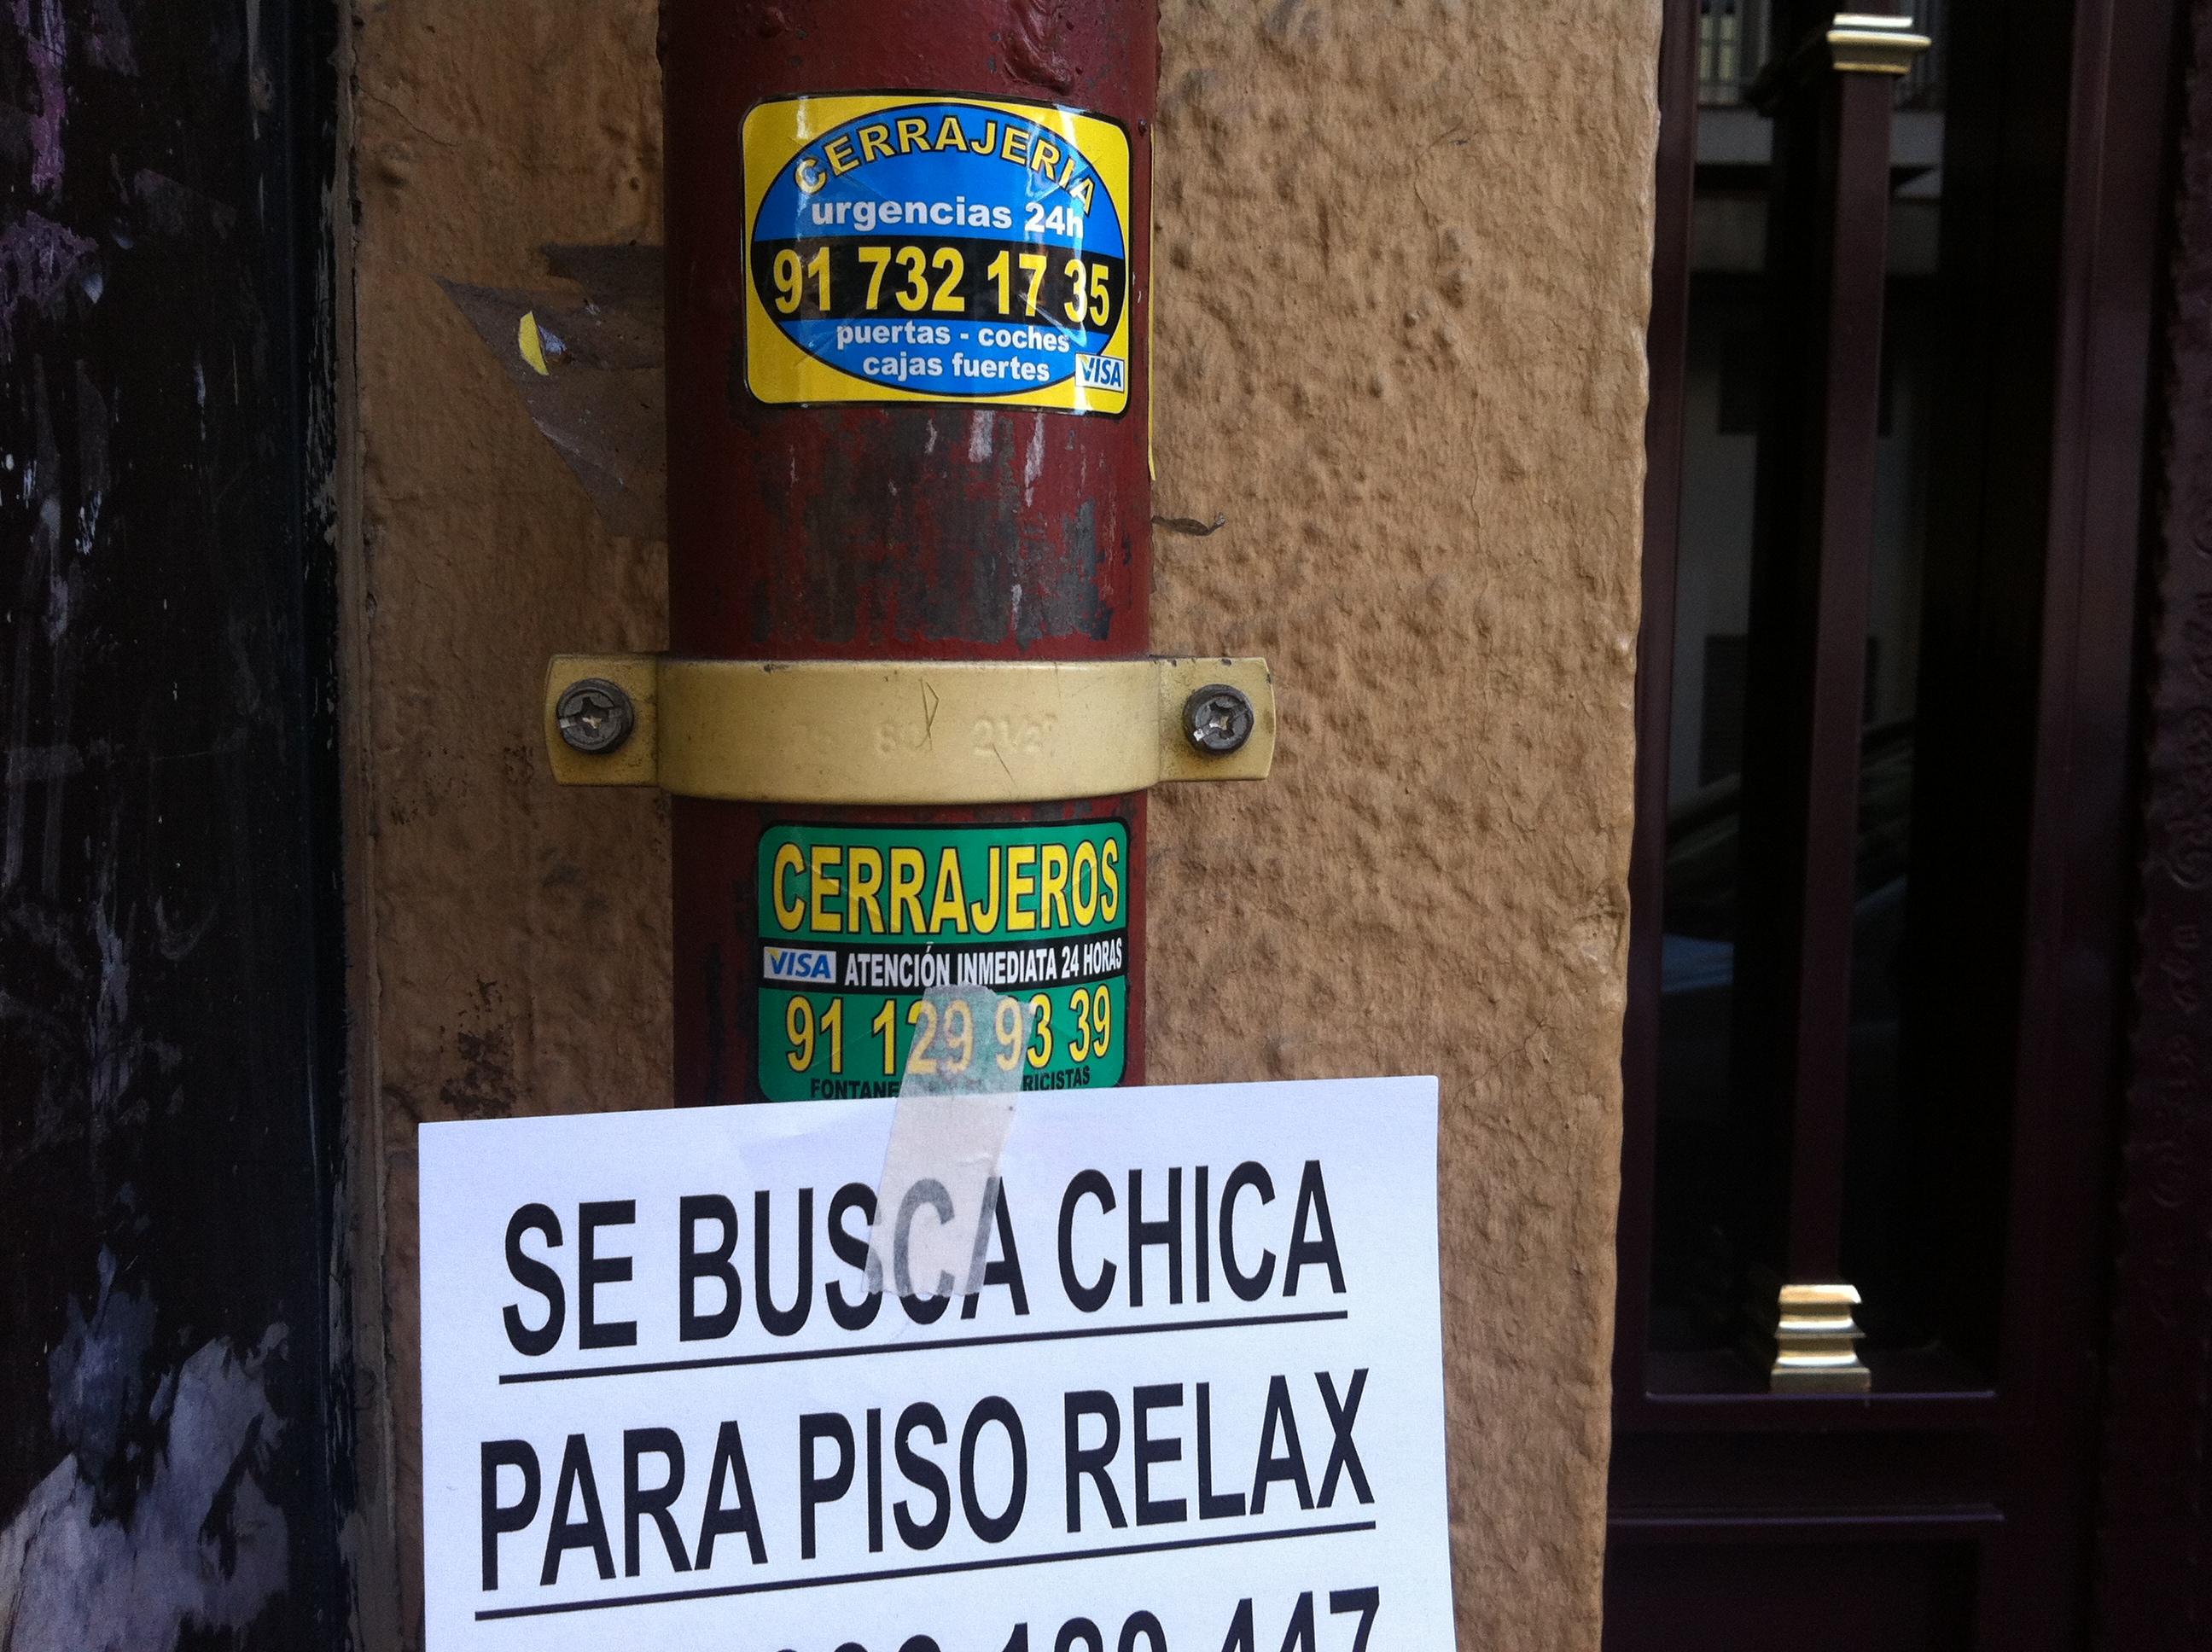 se busca chica piso relax